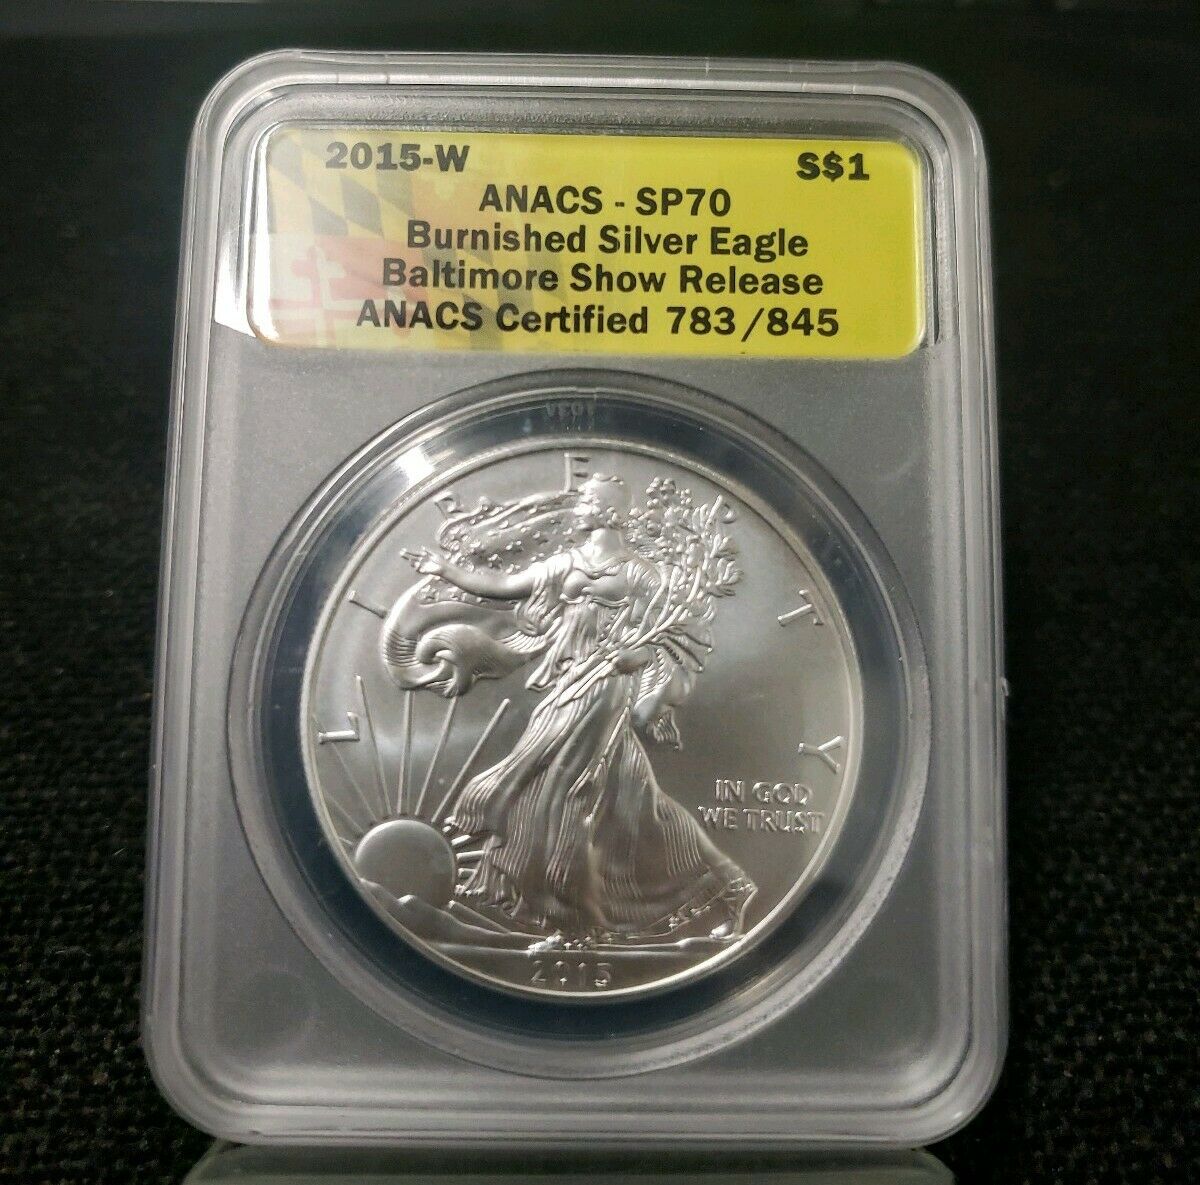 2015 W Burnished Silver Eagle- ANACS SP70 West Point -Baltimore Show